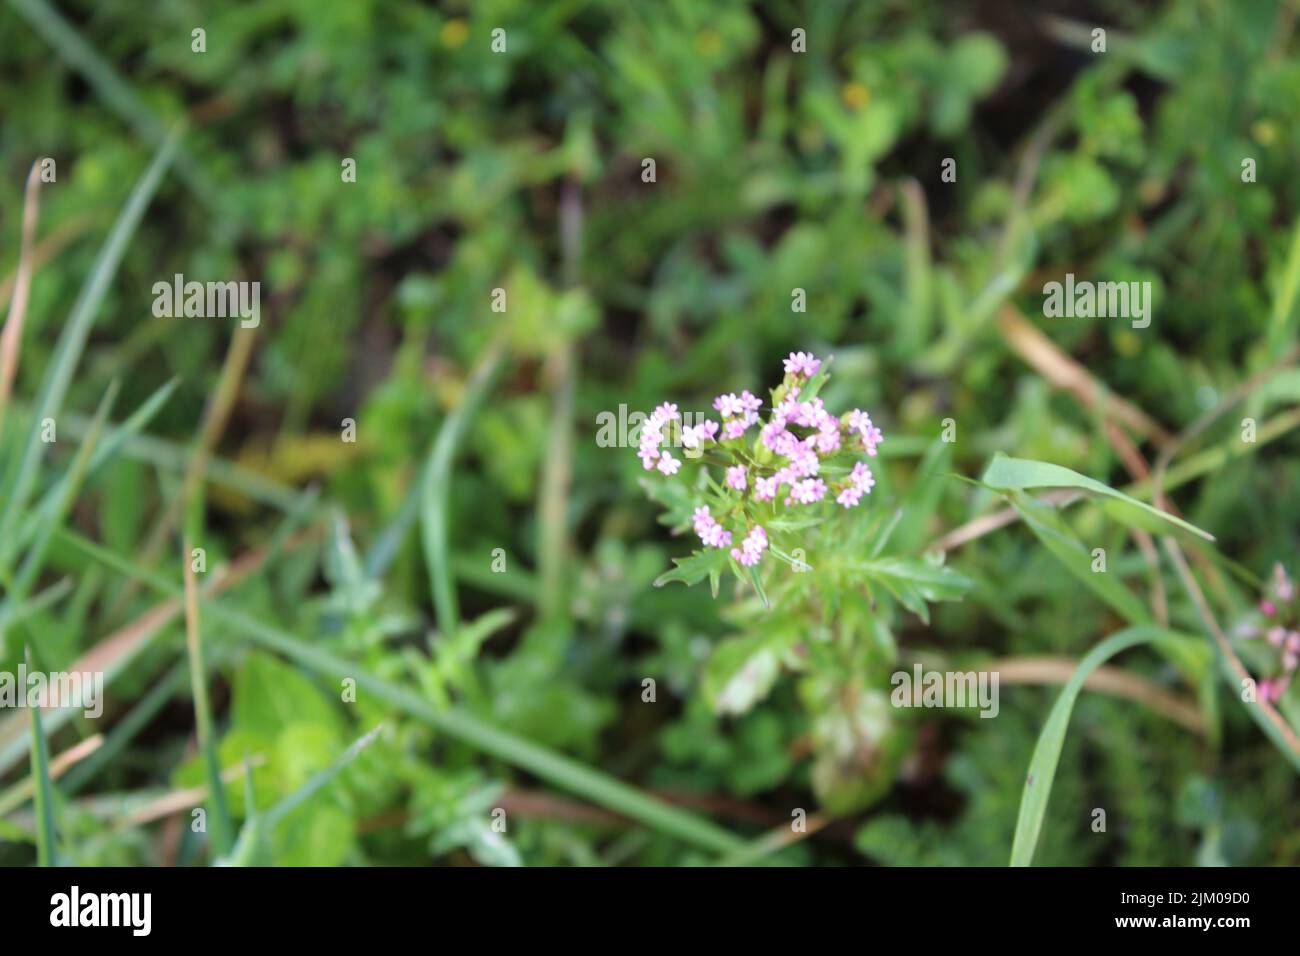 A closeup shot of valerian on the blurry background Stock Photo